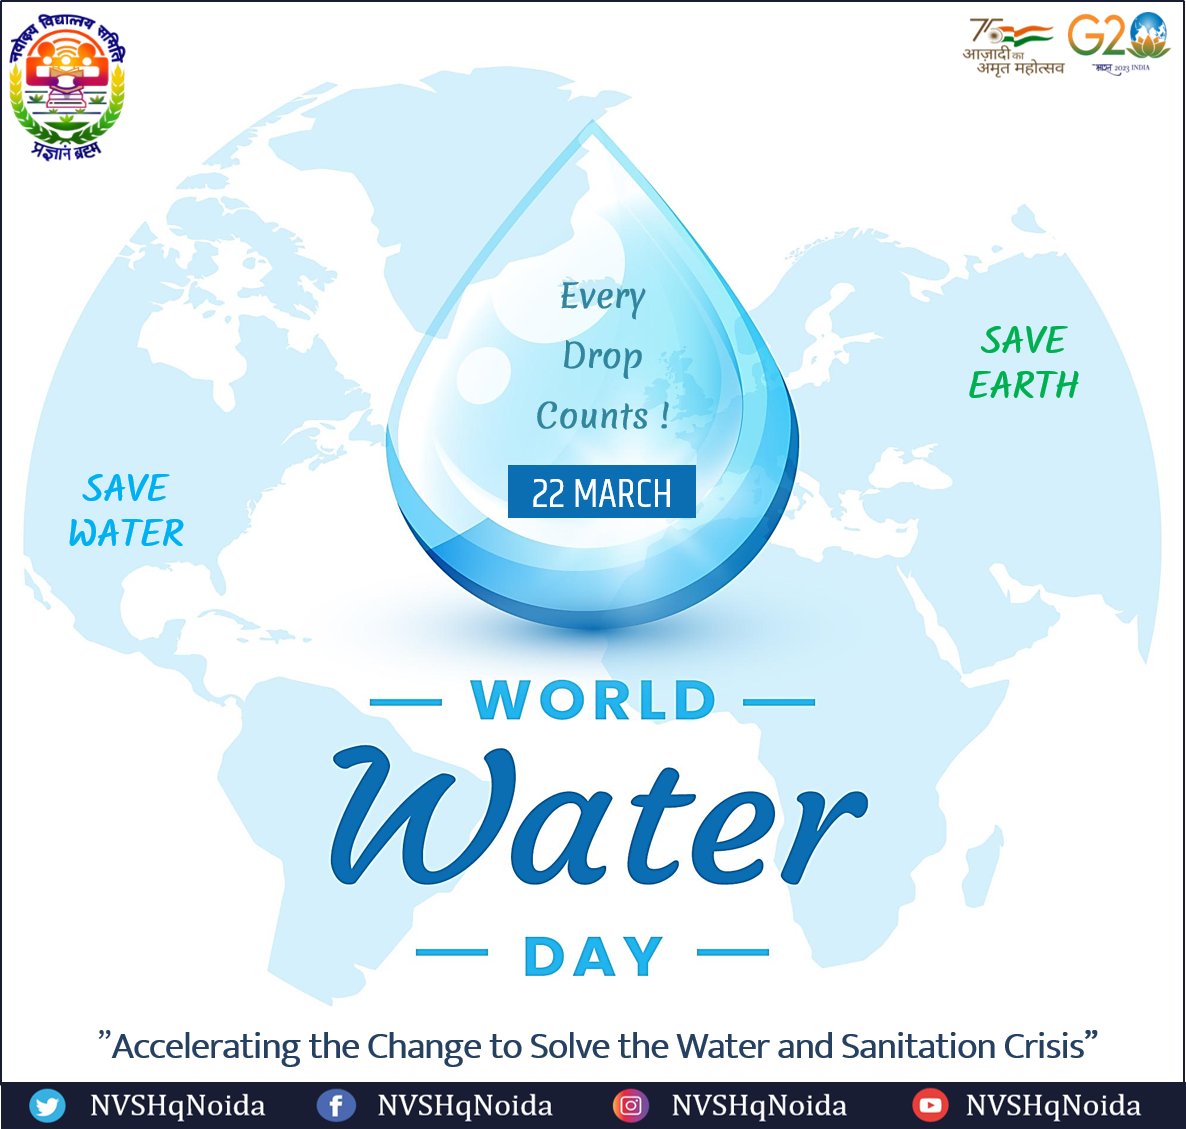 No Water💧 No Life👥 No Blue💦 No Green🌏

On #WorldWaterDay Let's join the hands to #AccelerateChange for conserving our planet's most precious resource - Water💧 

#SaveWaterSaveLiFE #WaterDay2023